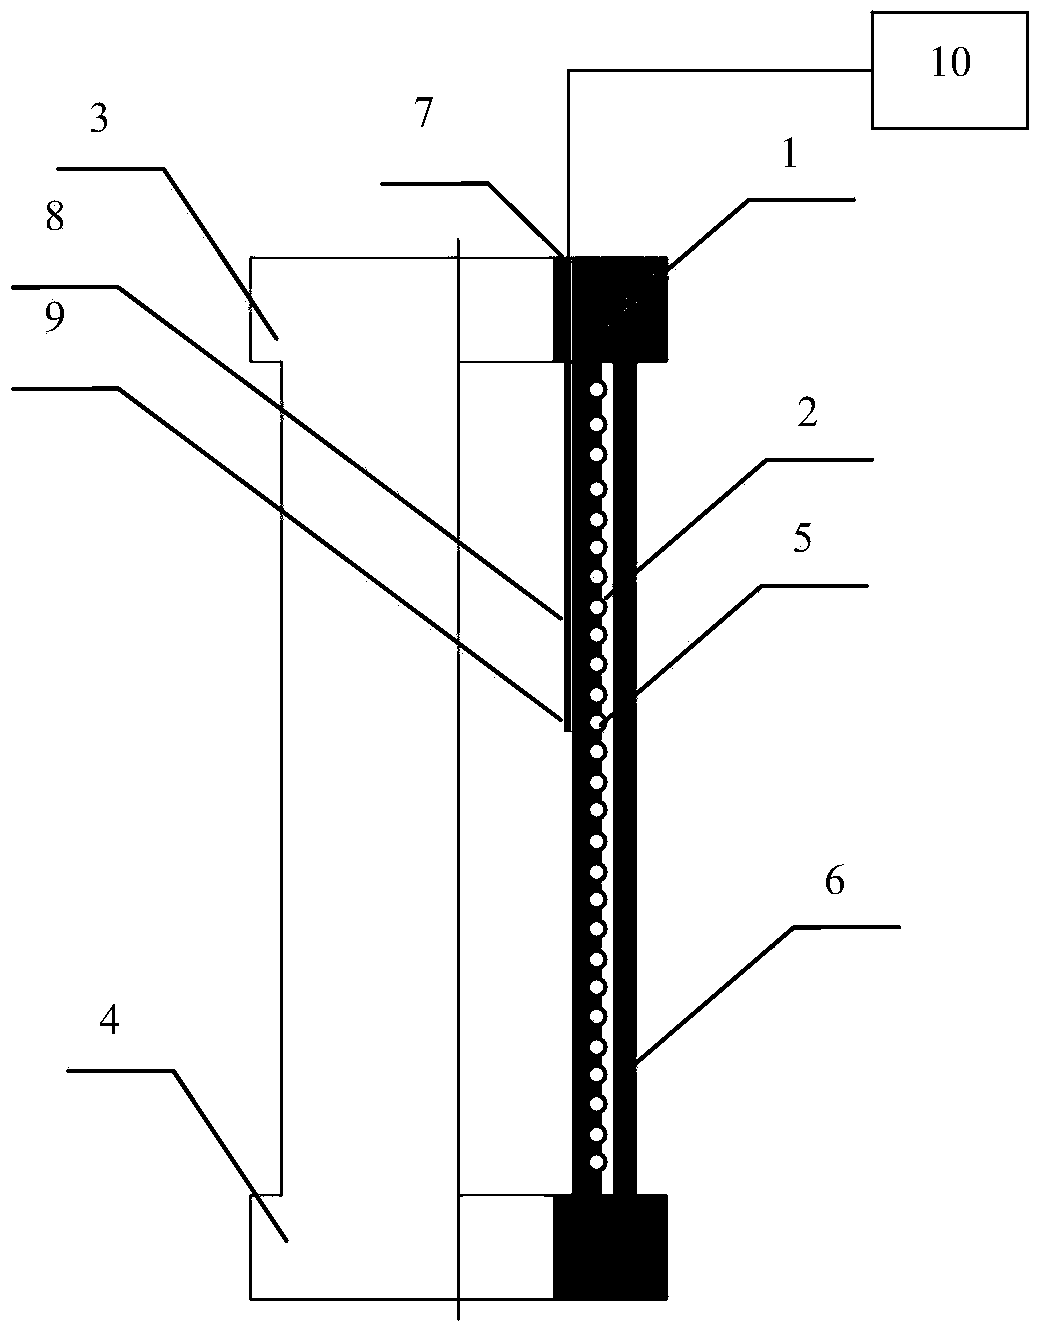 Visual fluidized bed reaction analysis system